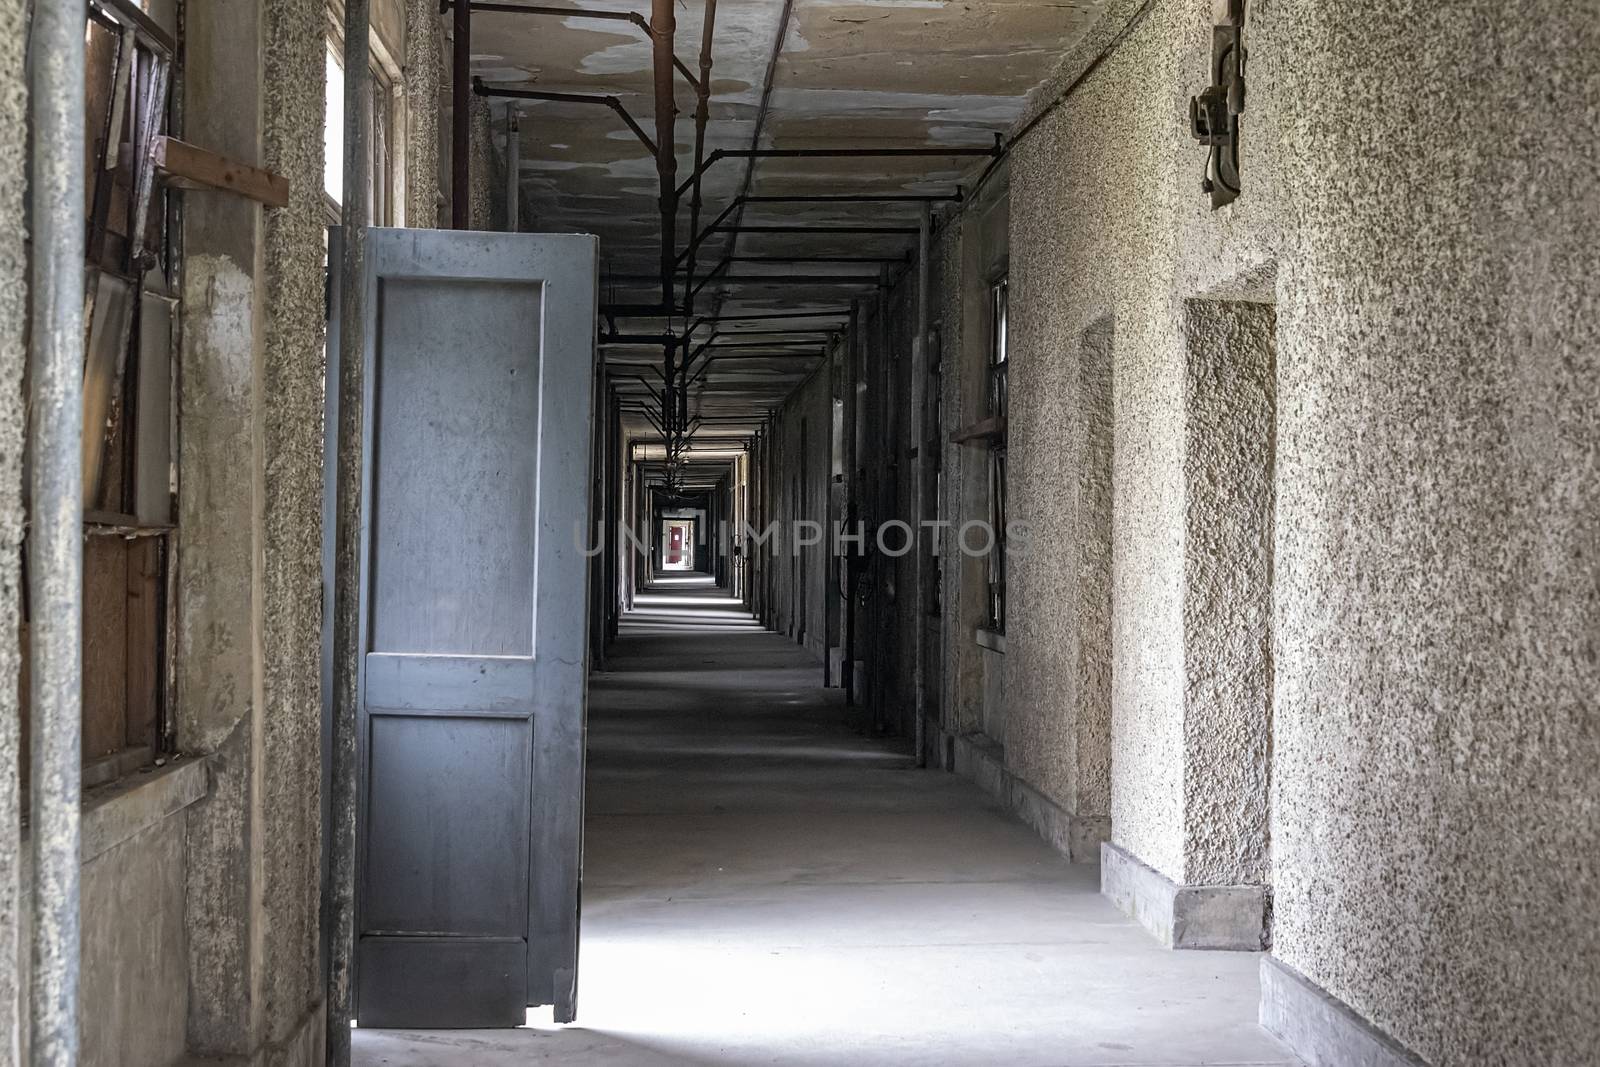 USA, New York, Ellis Island - May 2019: Entrace to the corridor of an abandoned hospital building